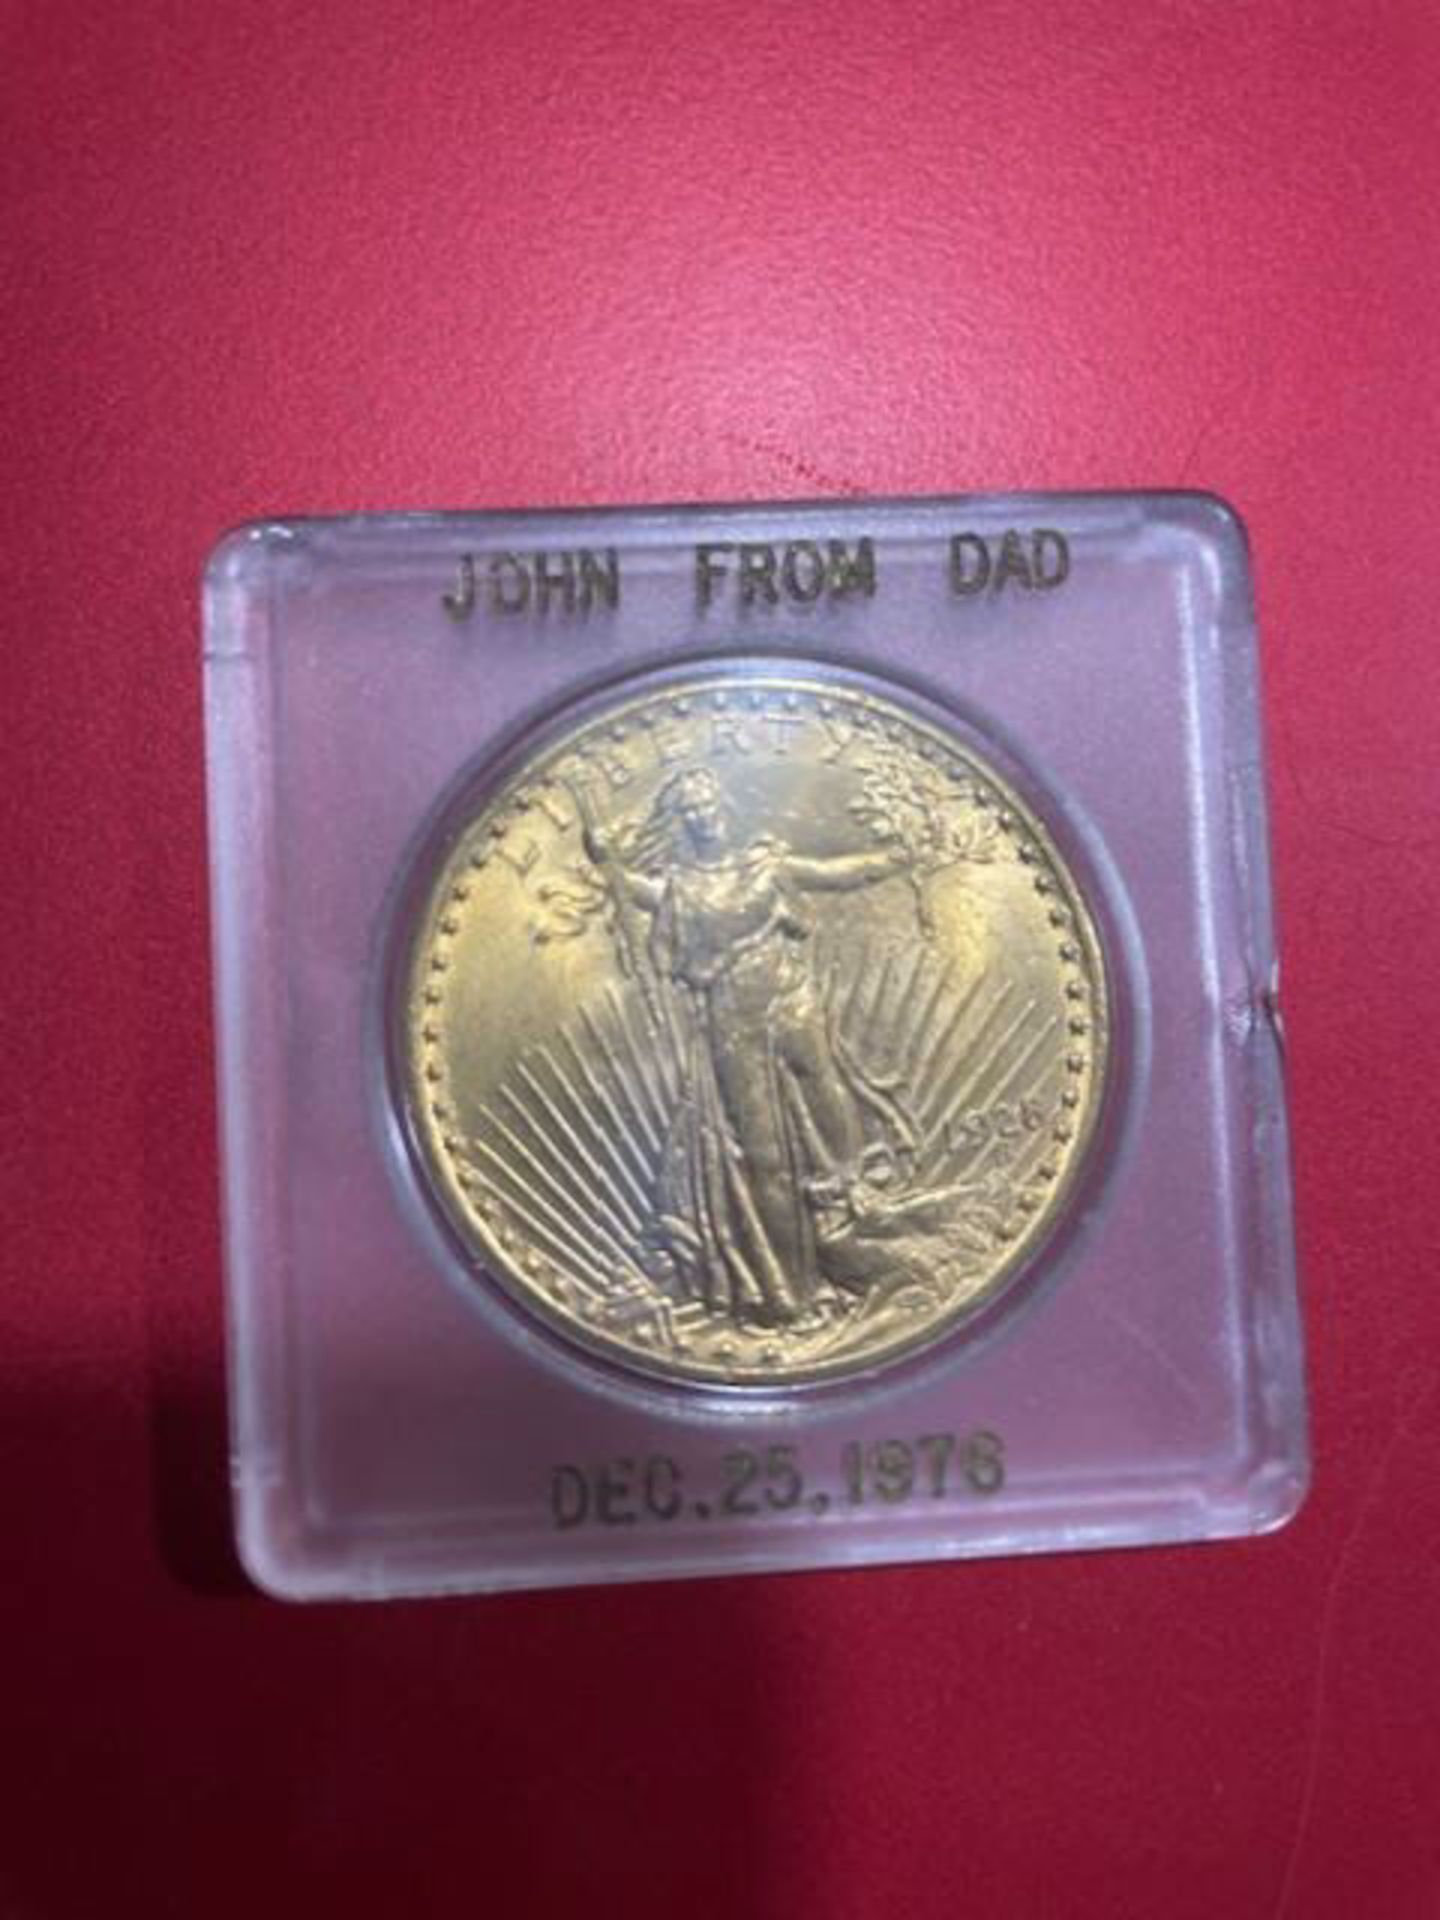 1928 St. Gaudens Double Eagle $20 Gold Coin - Image 5 of 12